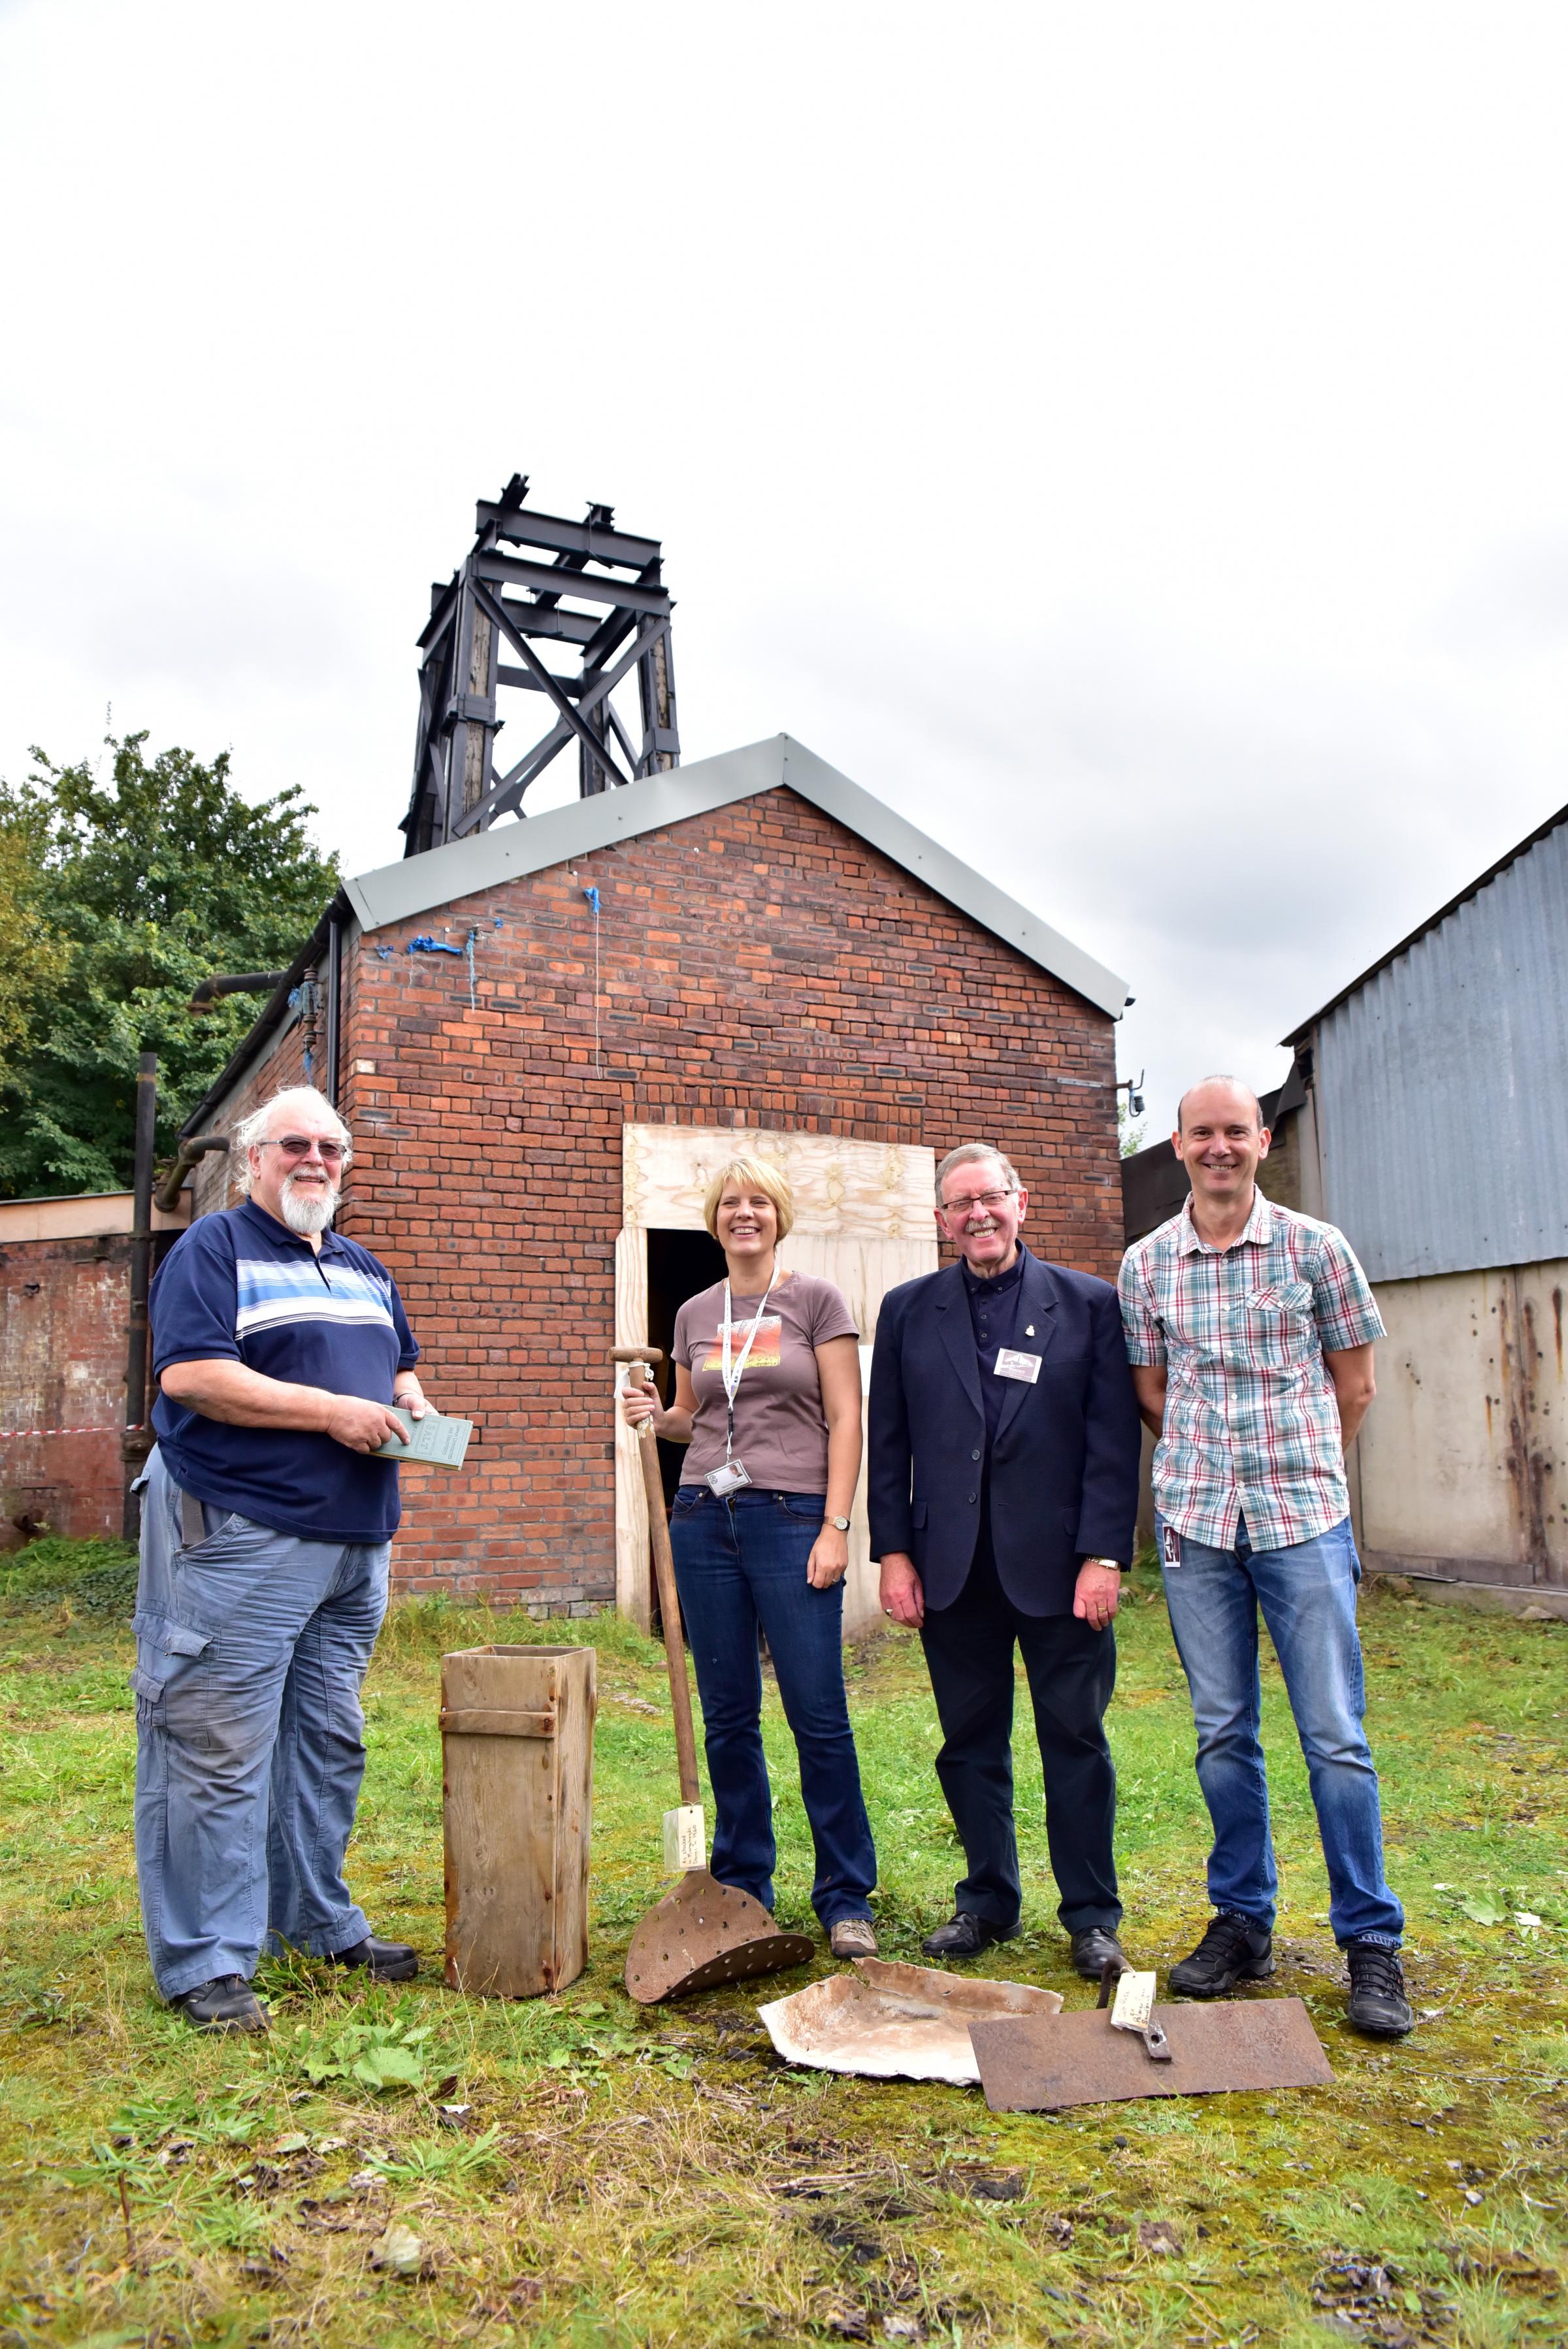 A group photo of four members of Middlewich Heritage Trust outside the brine pumps building at Murgatroyd's Brine Works.